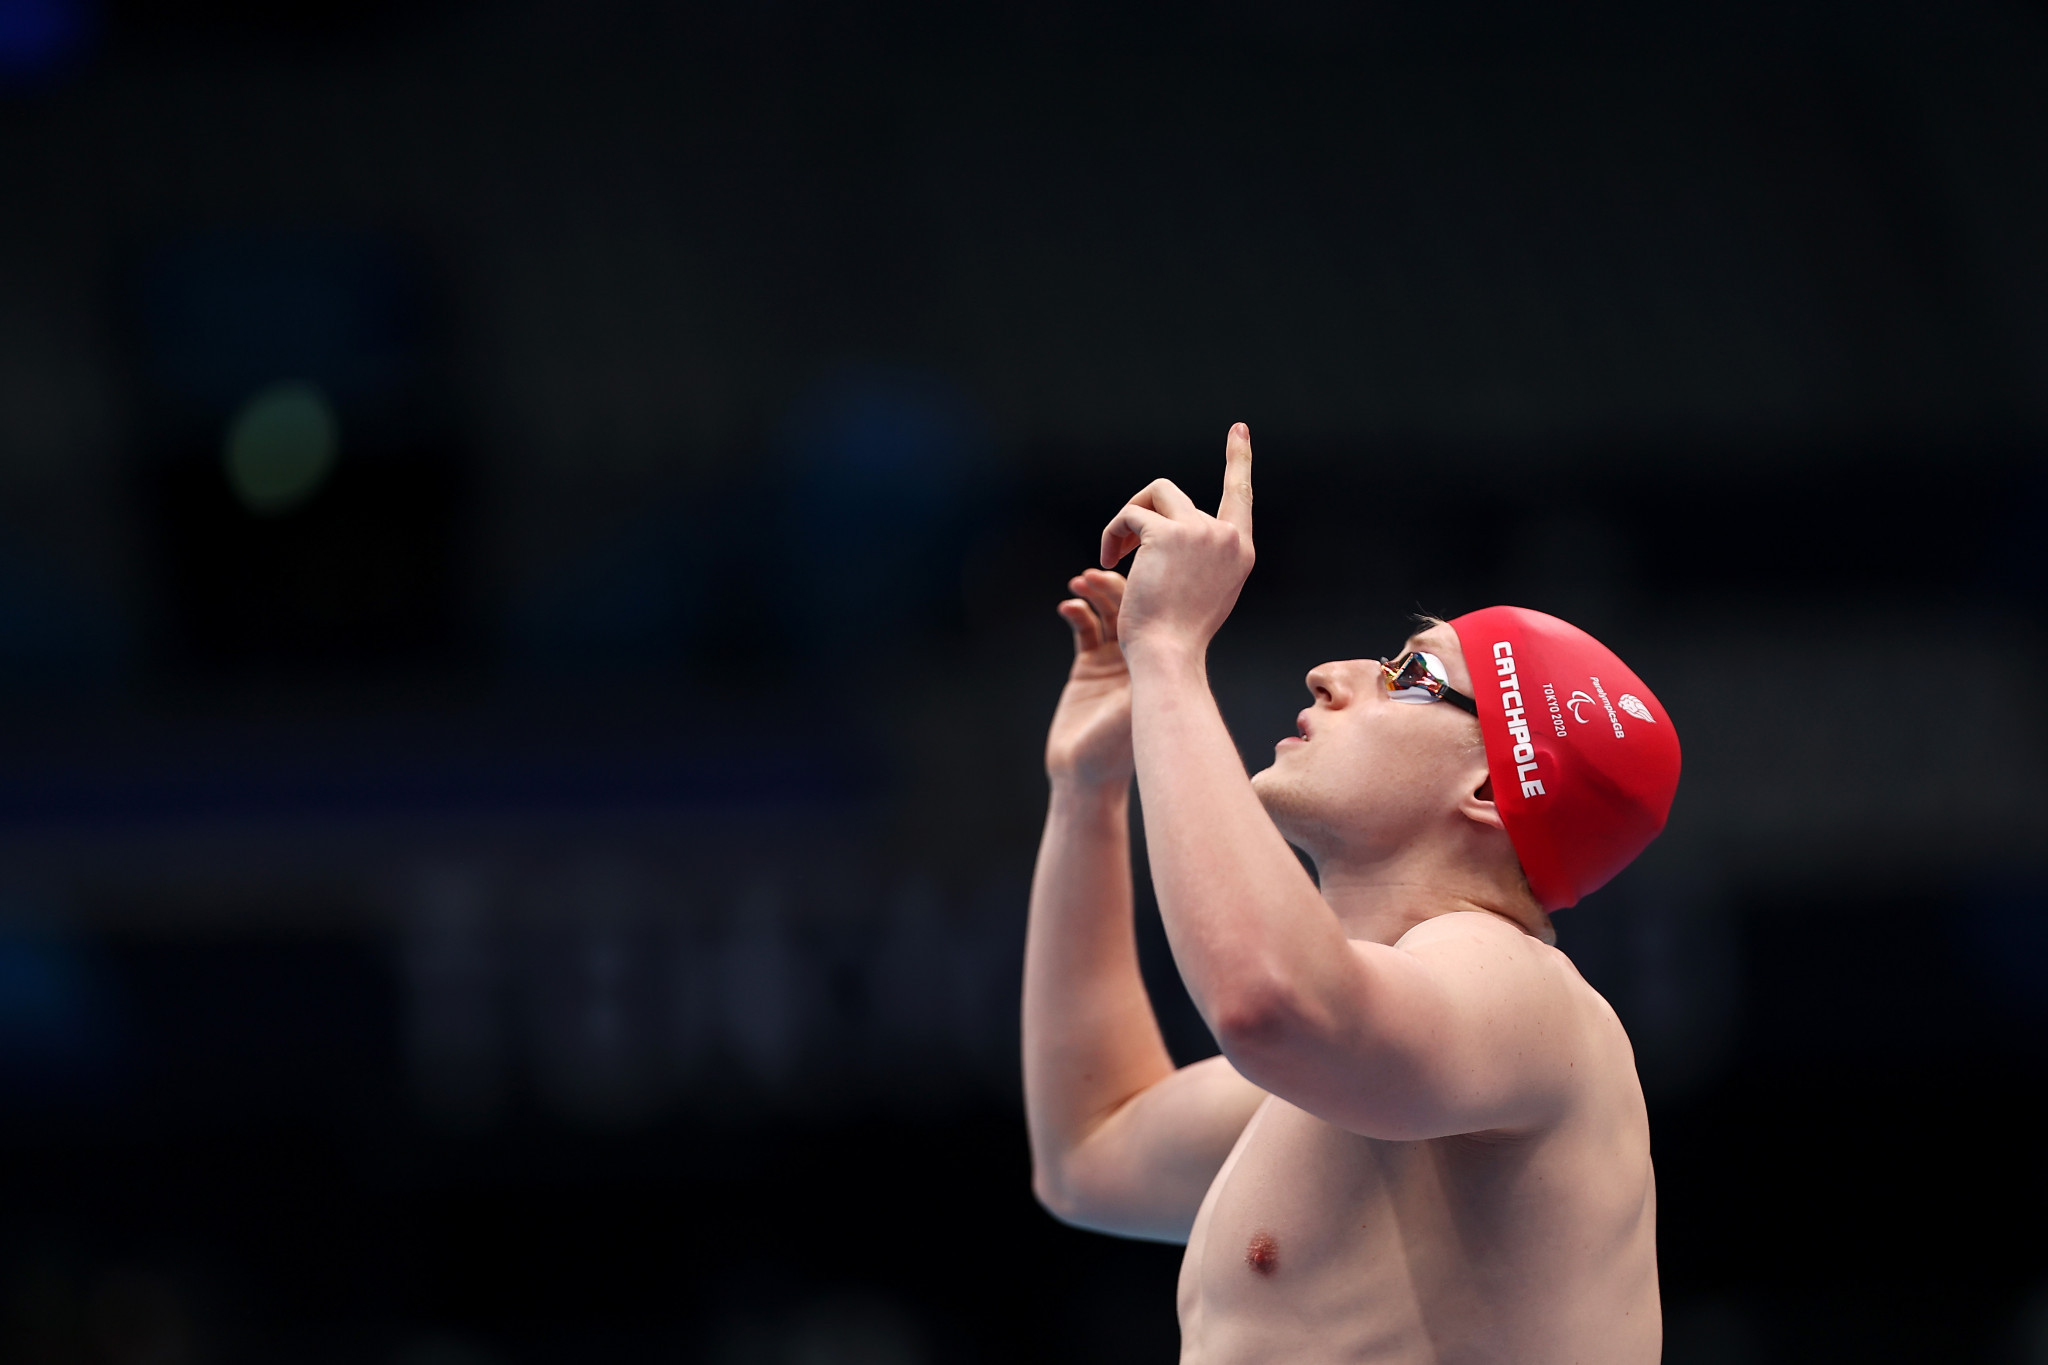 Jordan Catchpole was one of three British winners on the first day of the Para Swimming World Series event in Aberdeen ©Getty Images